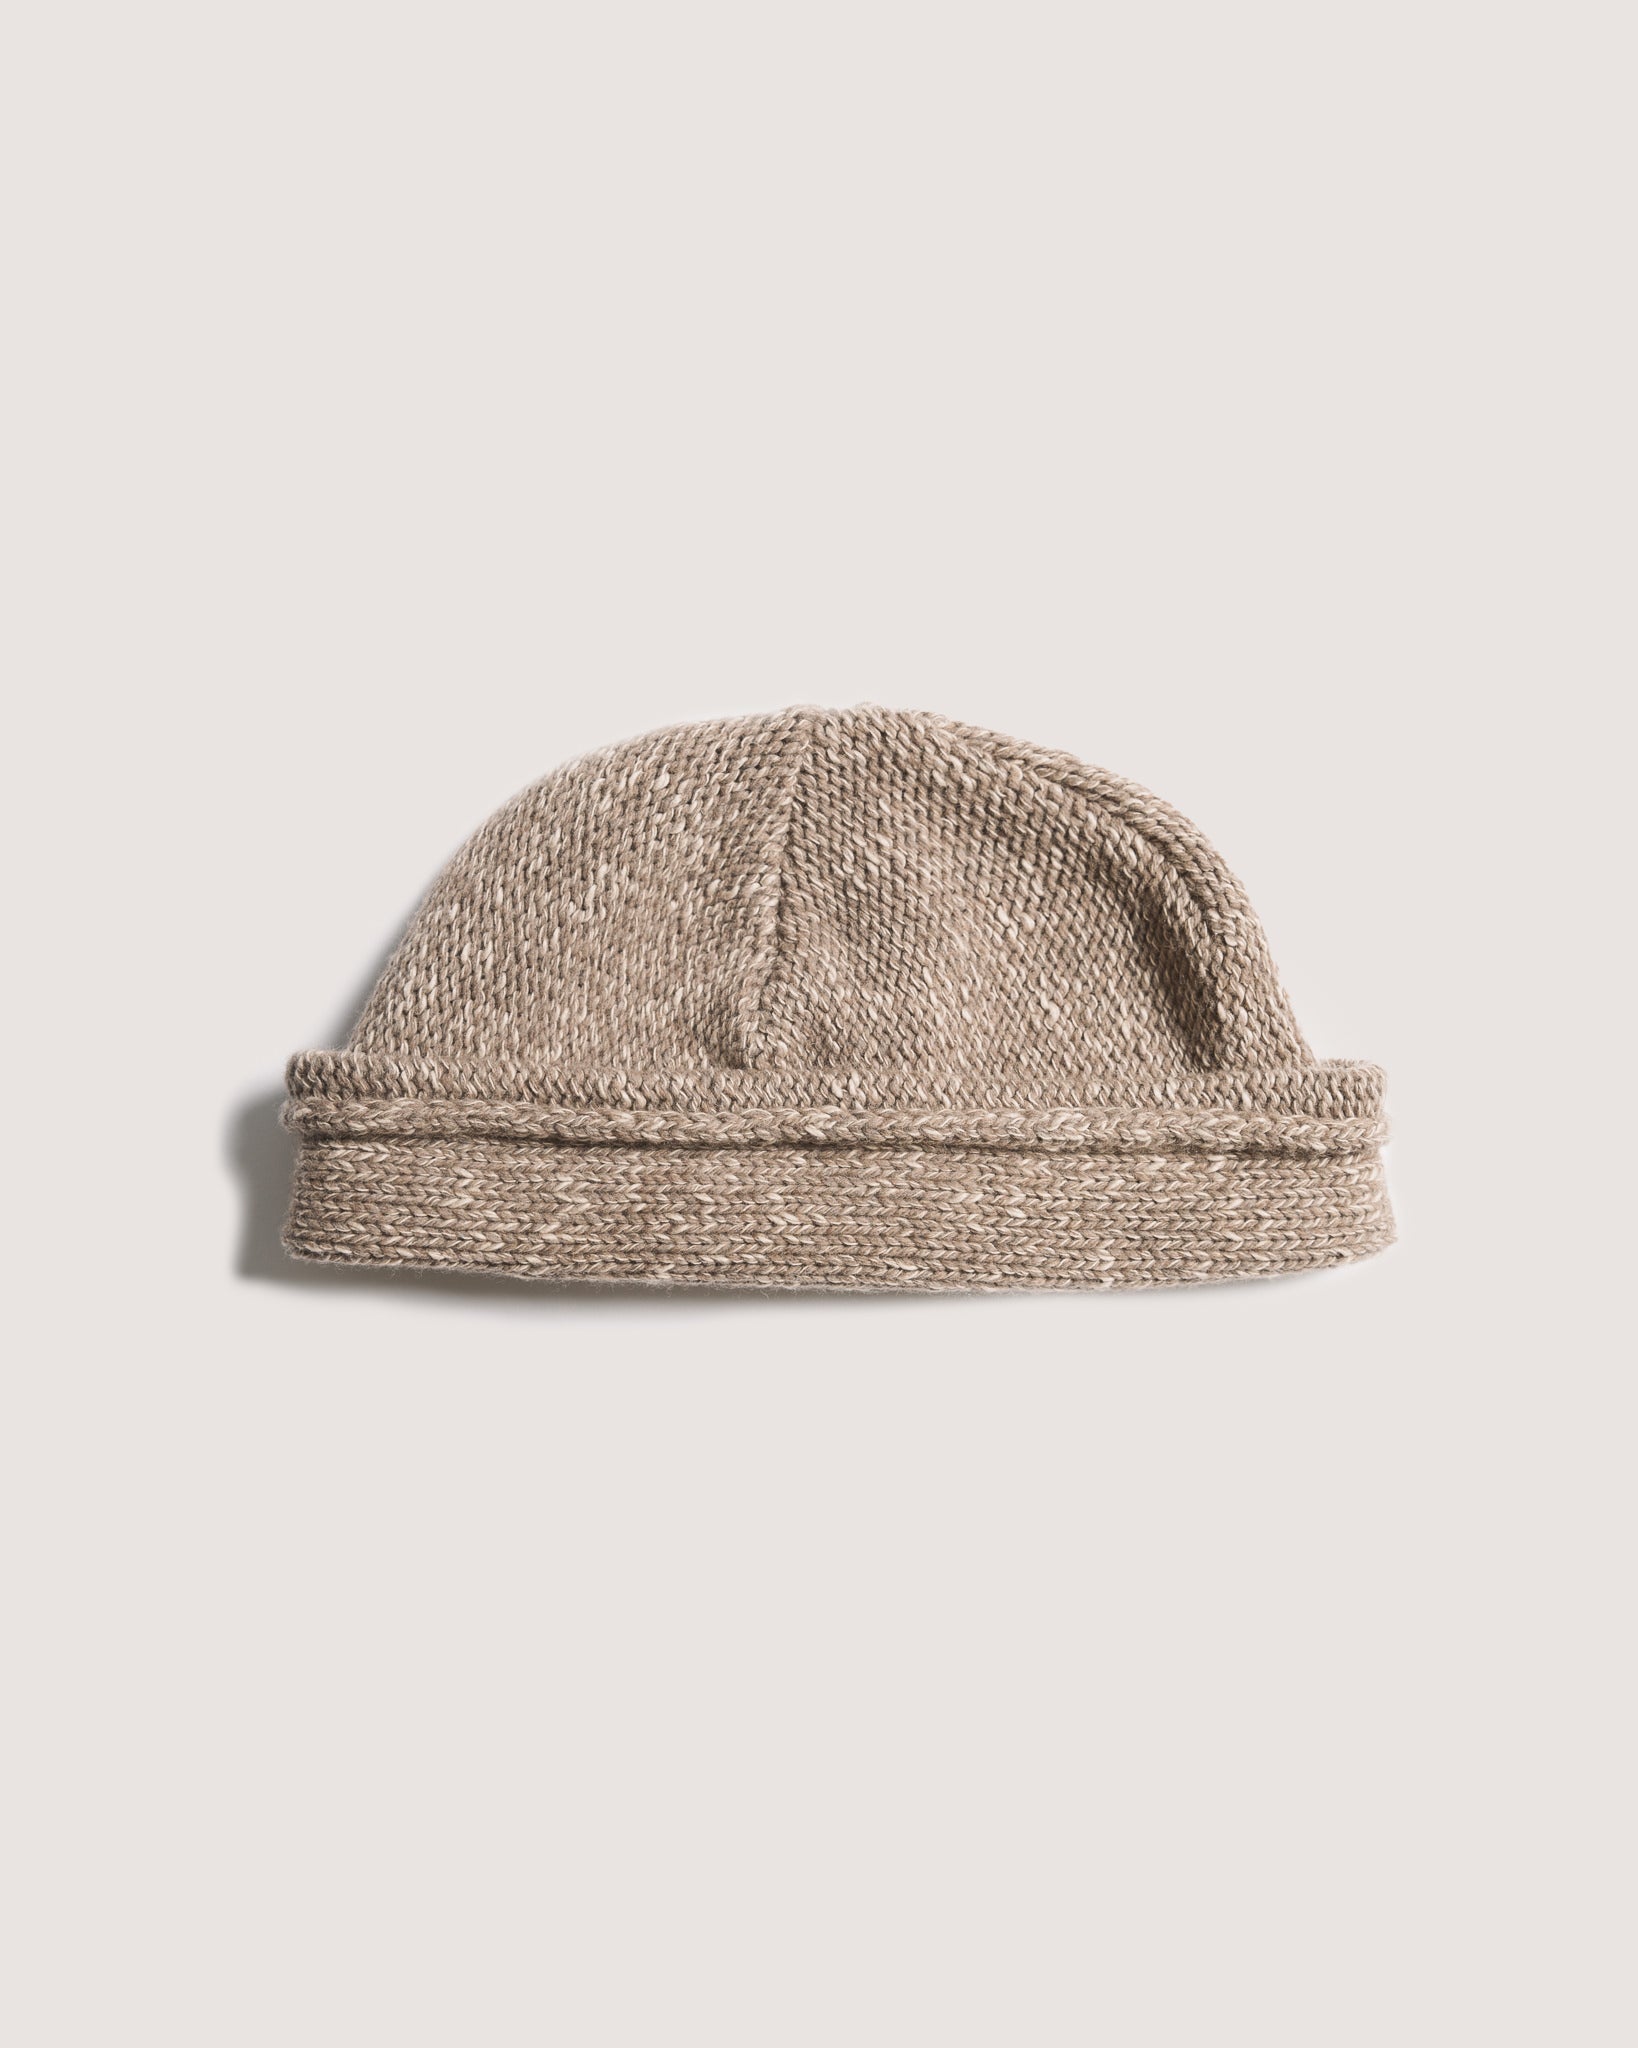 Satta | Maha Hat - Speckled Brown / Calico